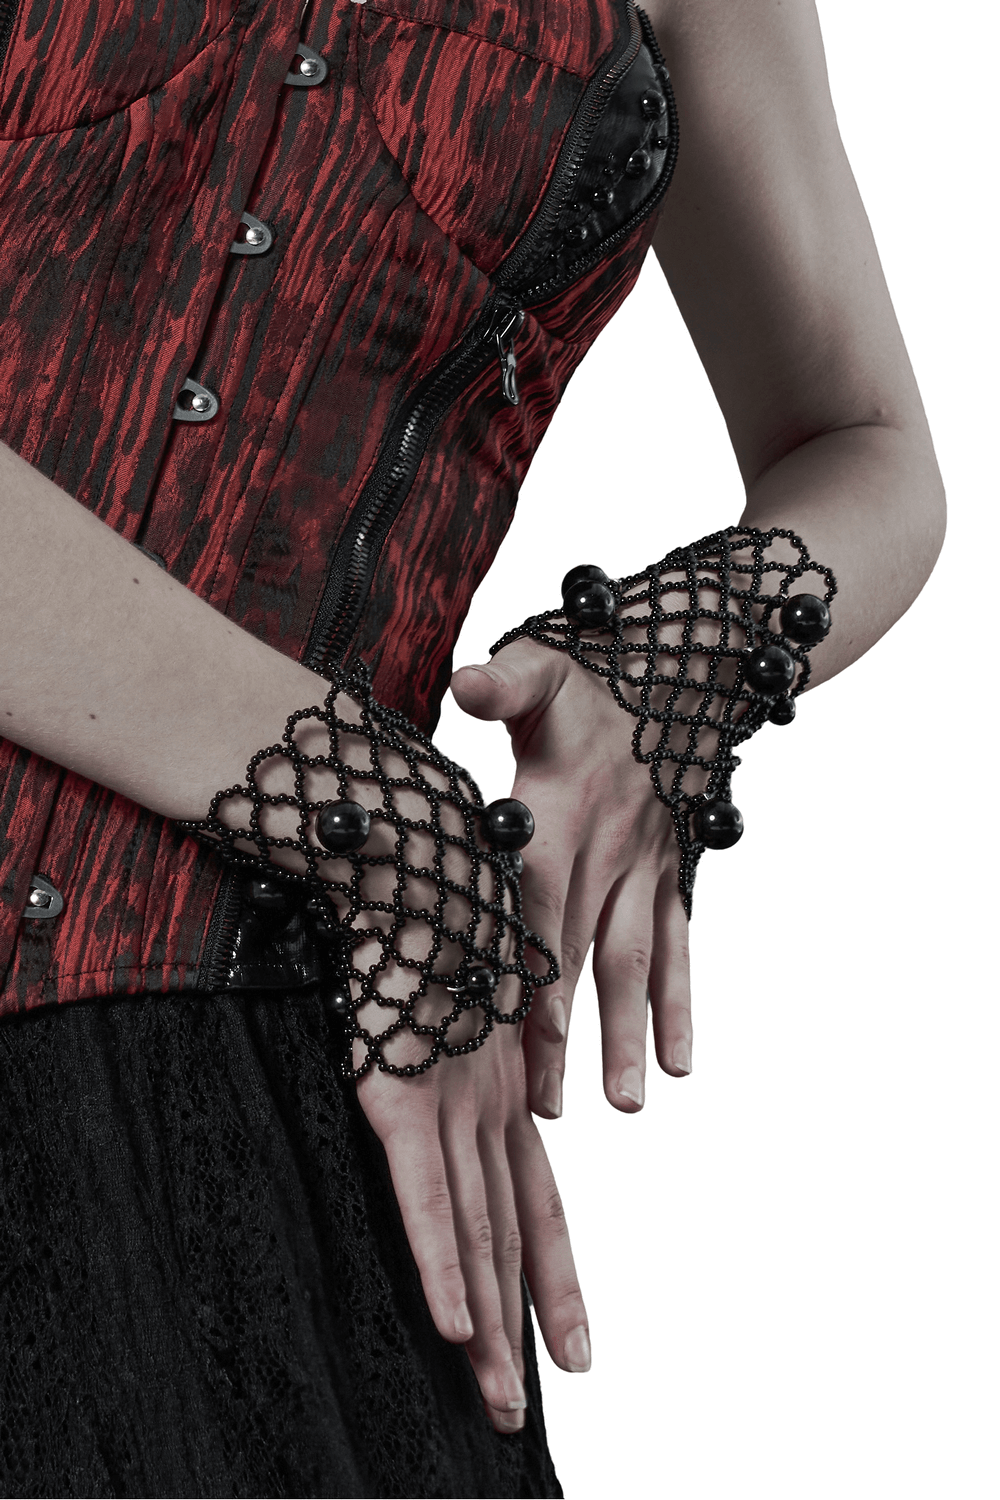 Elegant Gothic Pearl Lace Cuffs Set And Collar